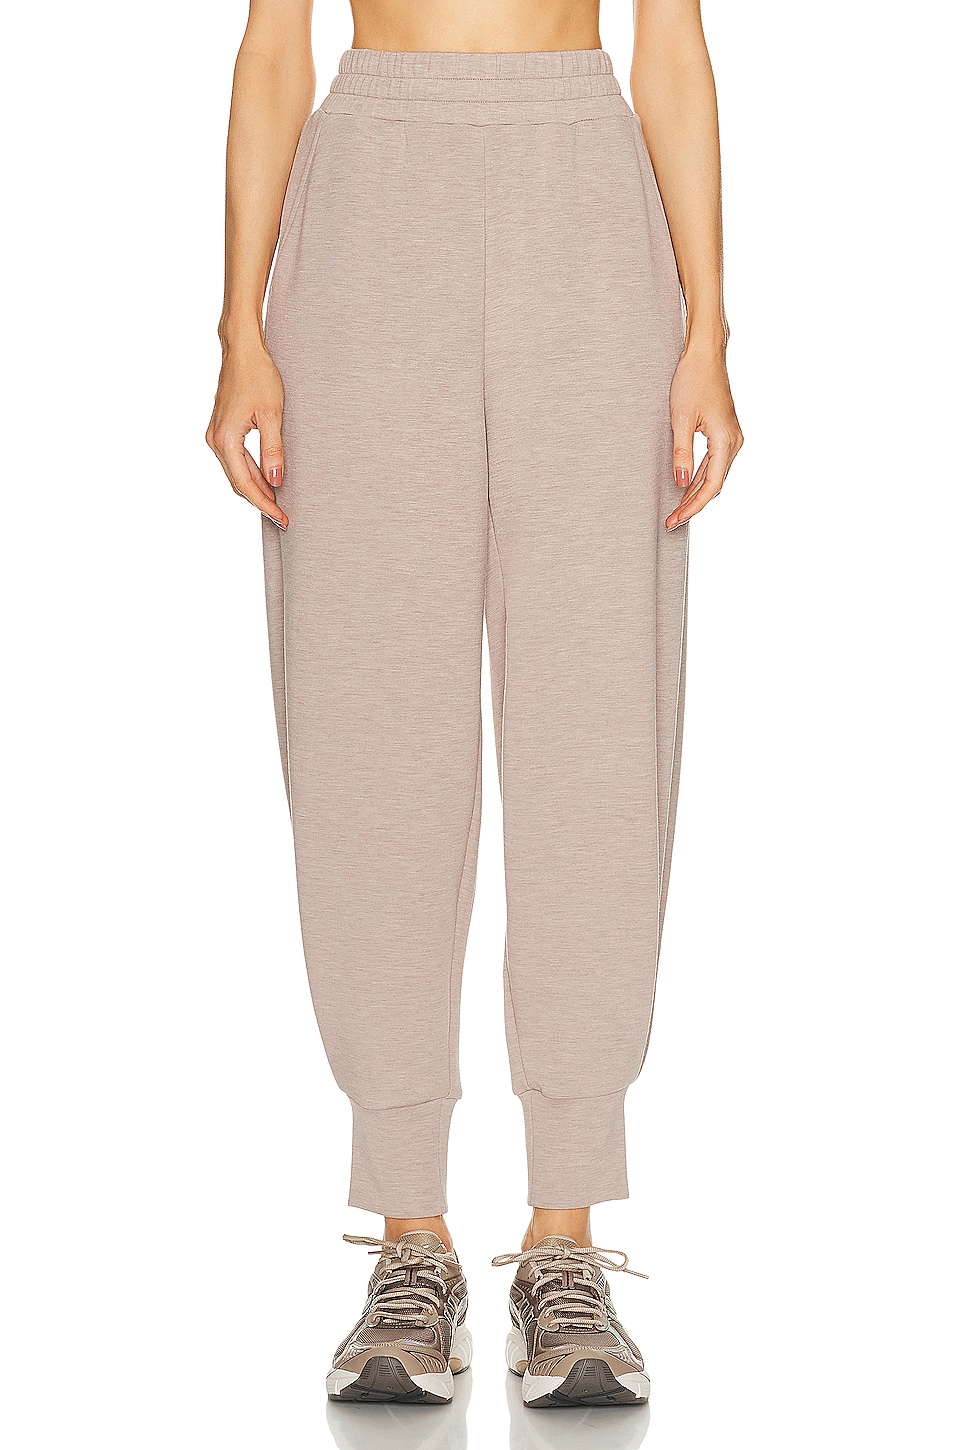 Image 1 of Varley The Relaxed 27.5 Pant in Taupe Marl